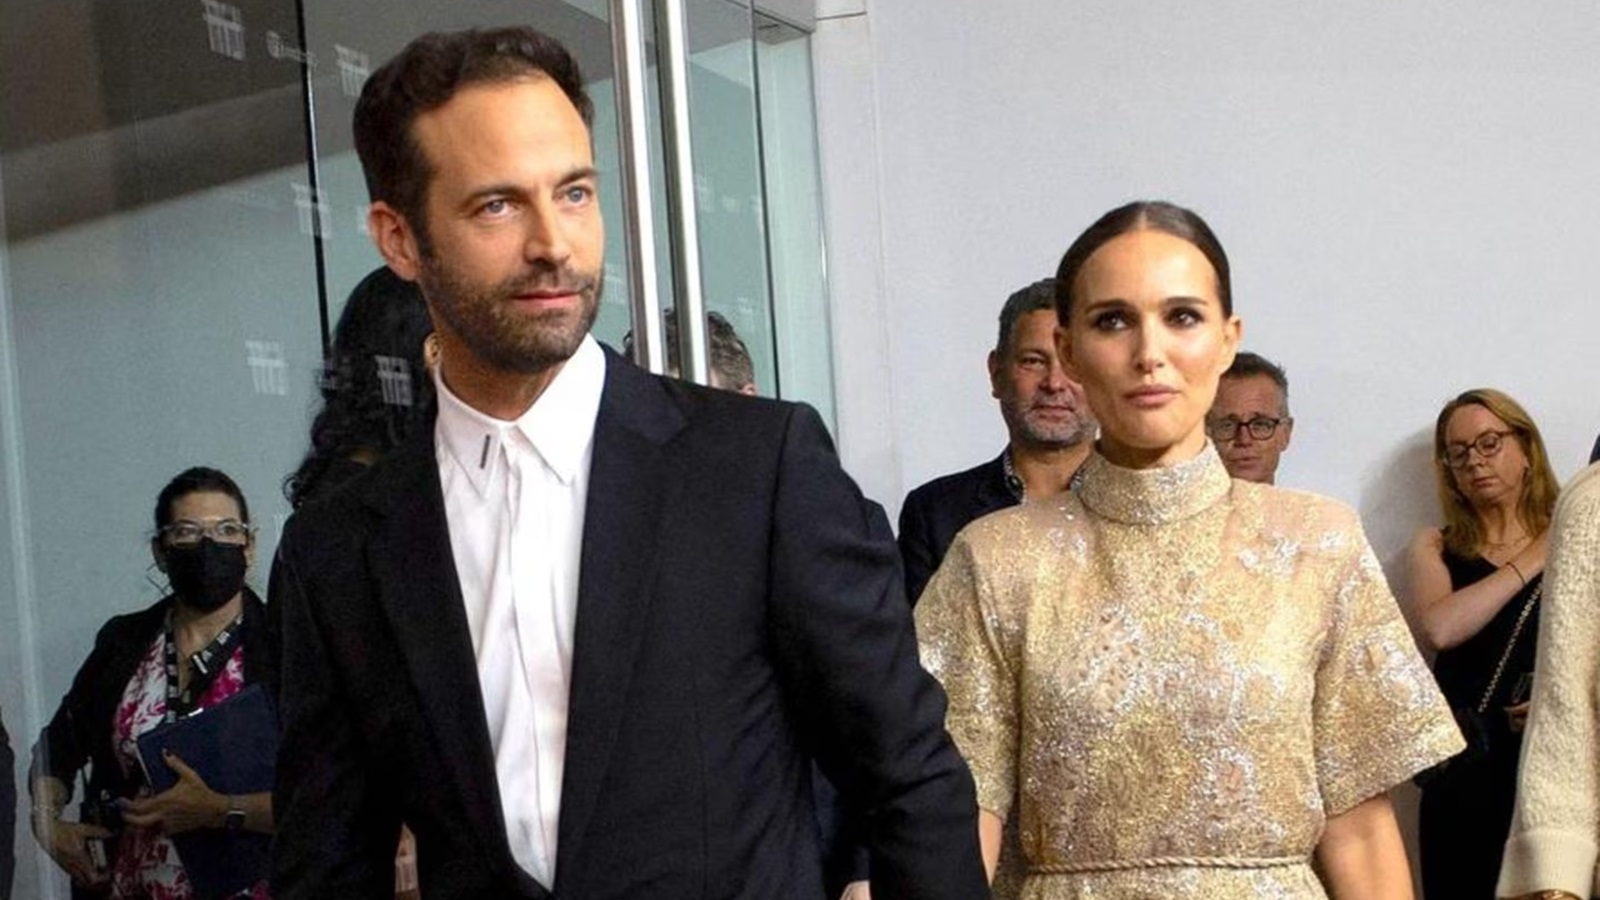 Natalie Portman broke up with her husband after cheating